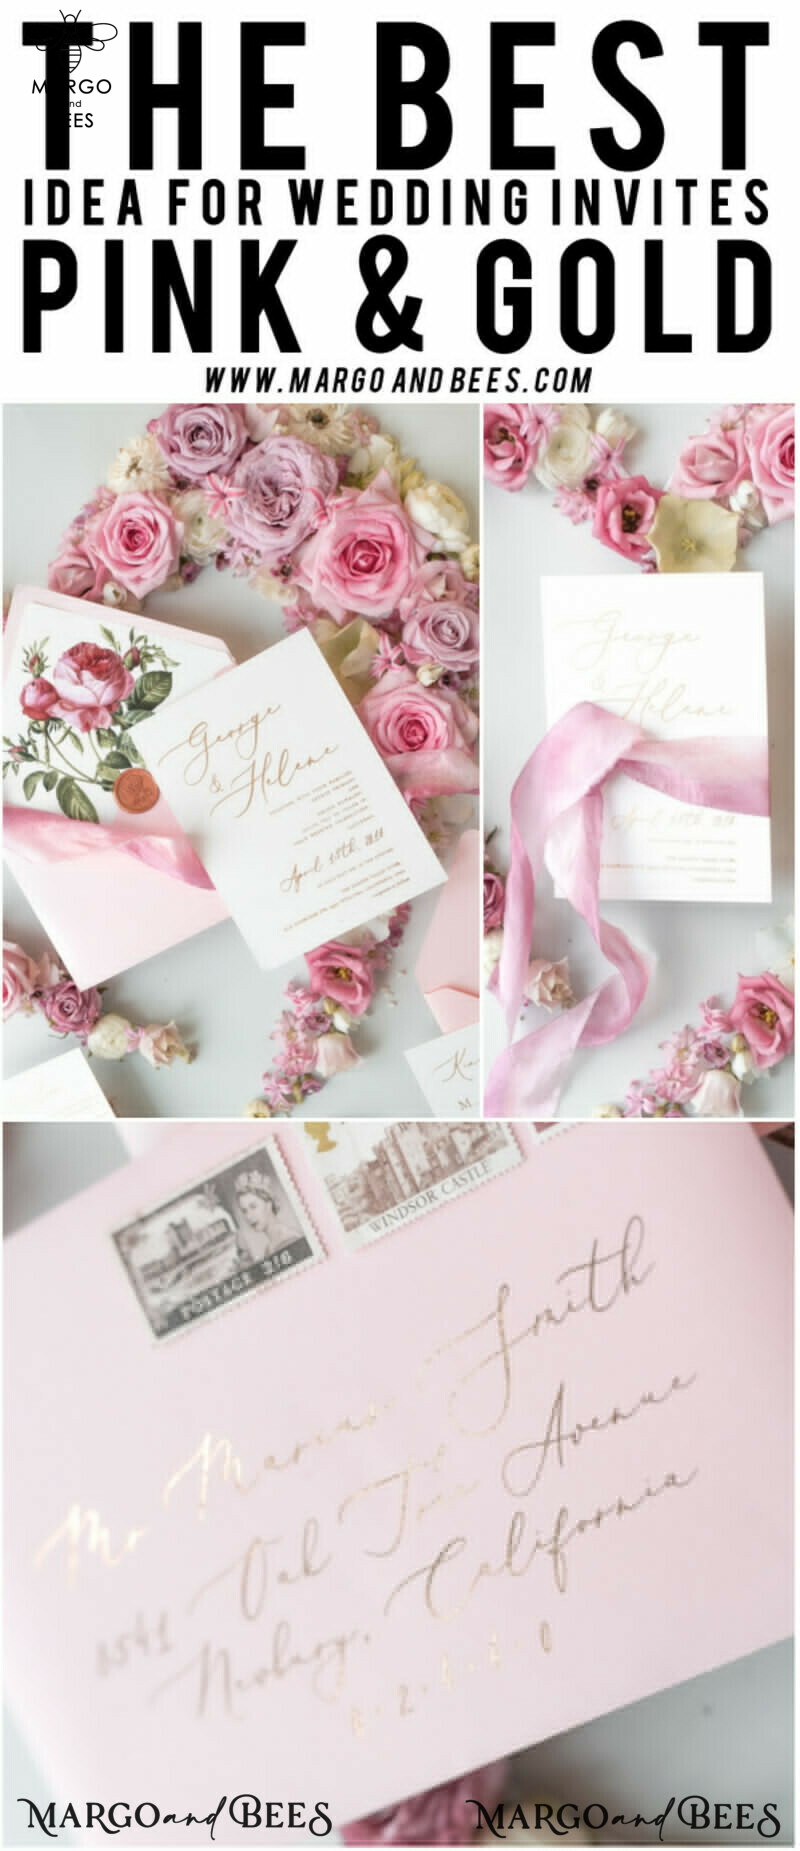 Romantic Blush Pink Wedding Invitations: Vintage Floral Wedding Invitation Suite with Elegant Wedding Cards and Hand Dyed Bow - Glamour Peony Wedding Stationery-44